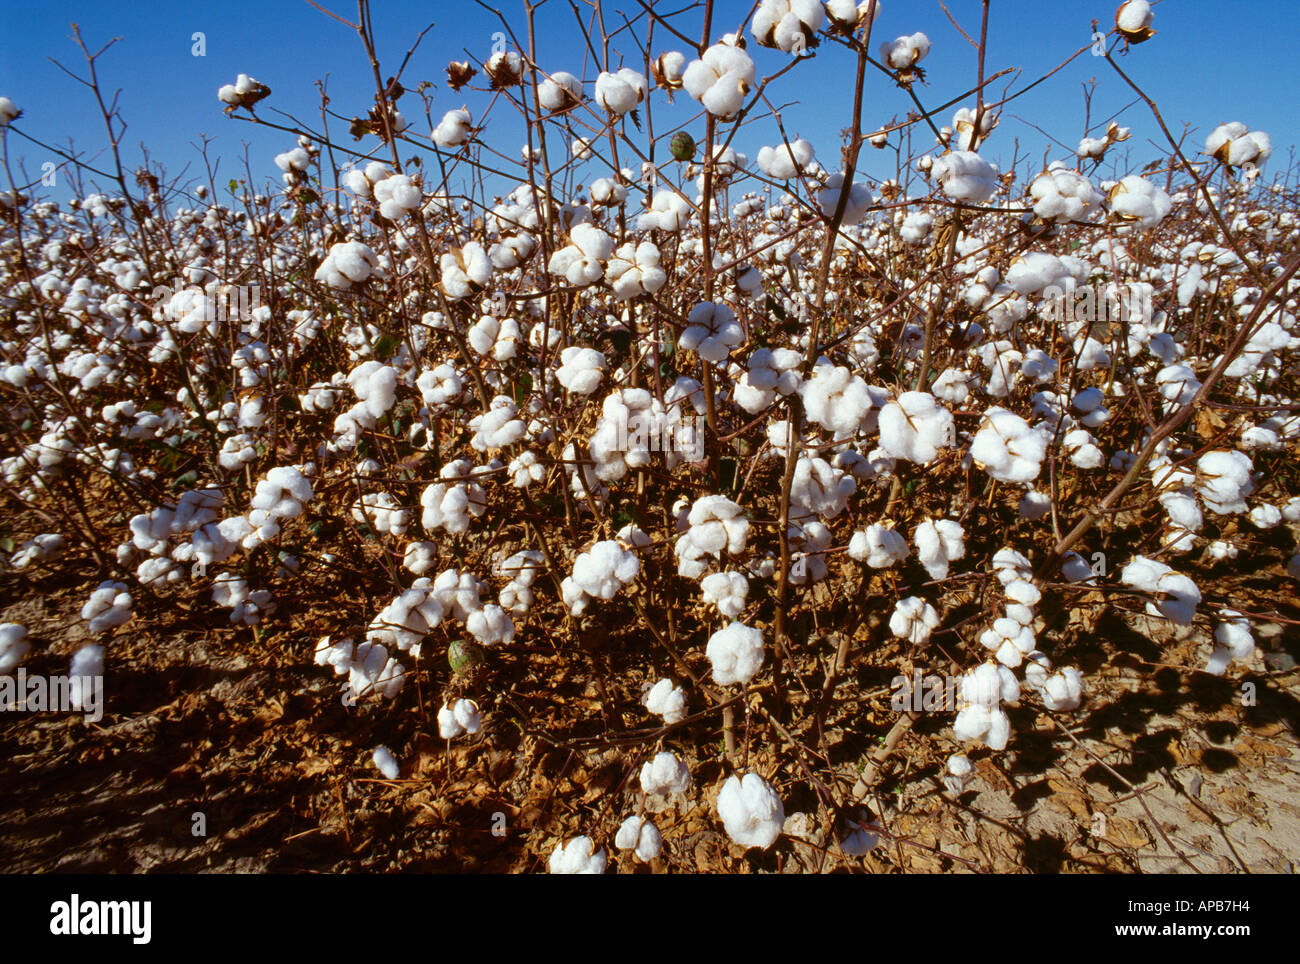 Agriculture - Sideview of mature cotton plants ready for harvest / Mississippi, USA. Stock Photo